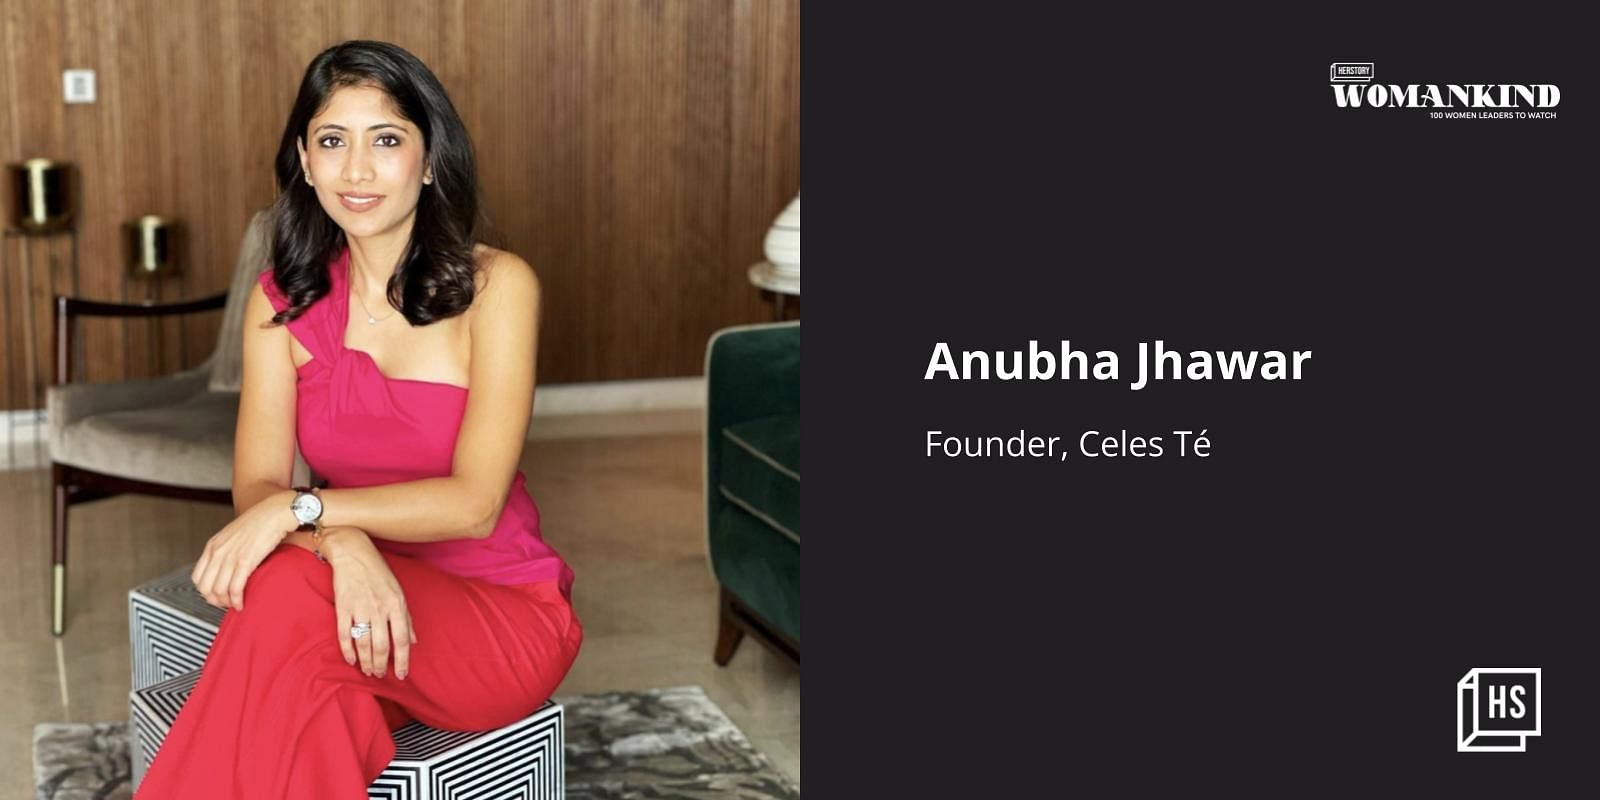 [100 Emerging Women Leaders] After studying design, Anubha Jhawar made her way back home to the tea industry